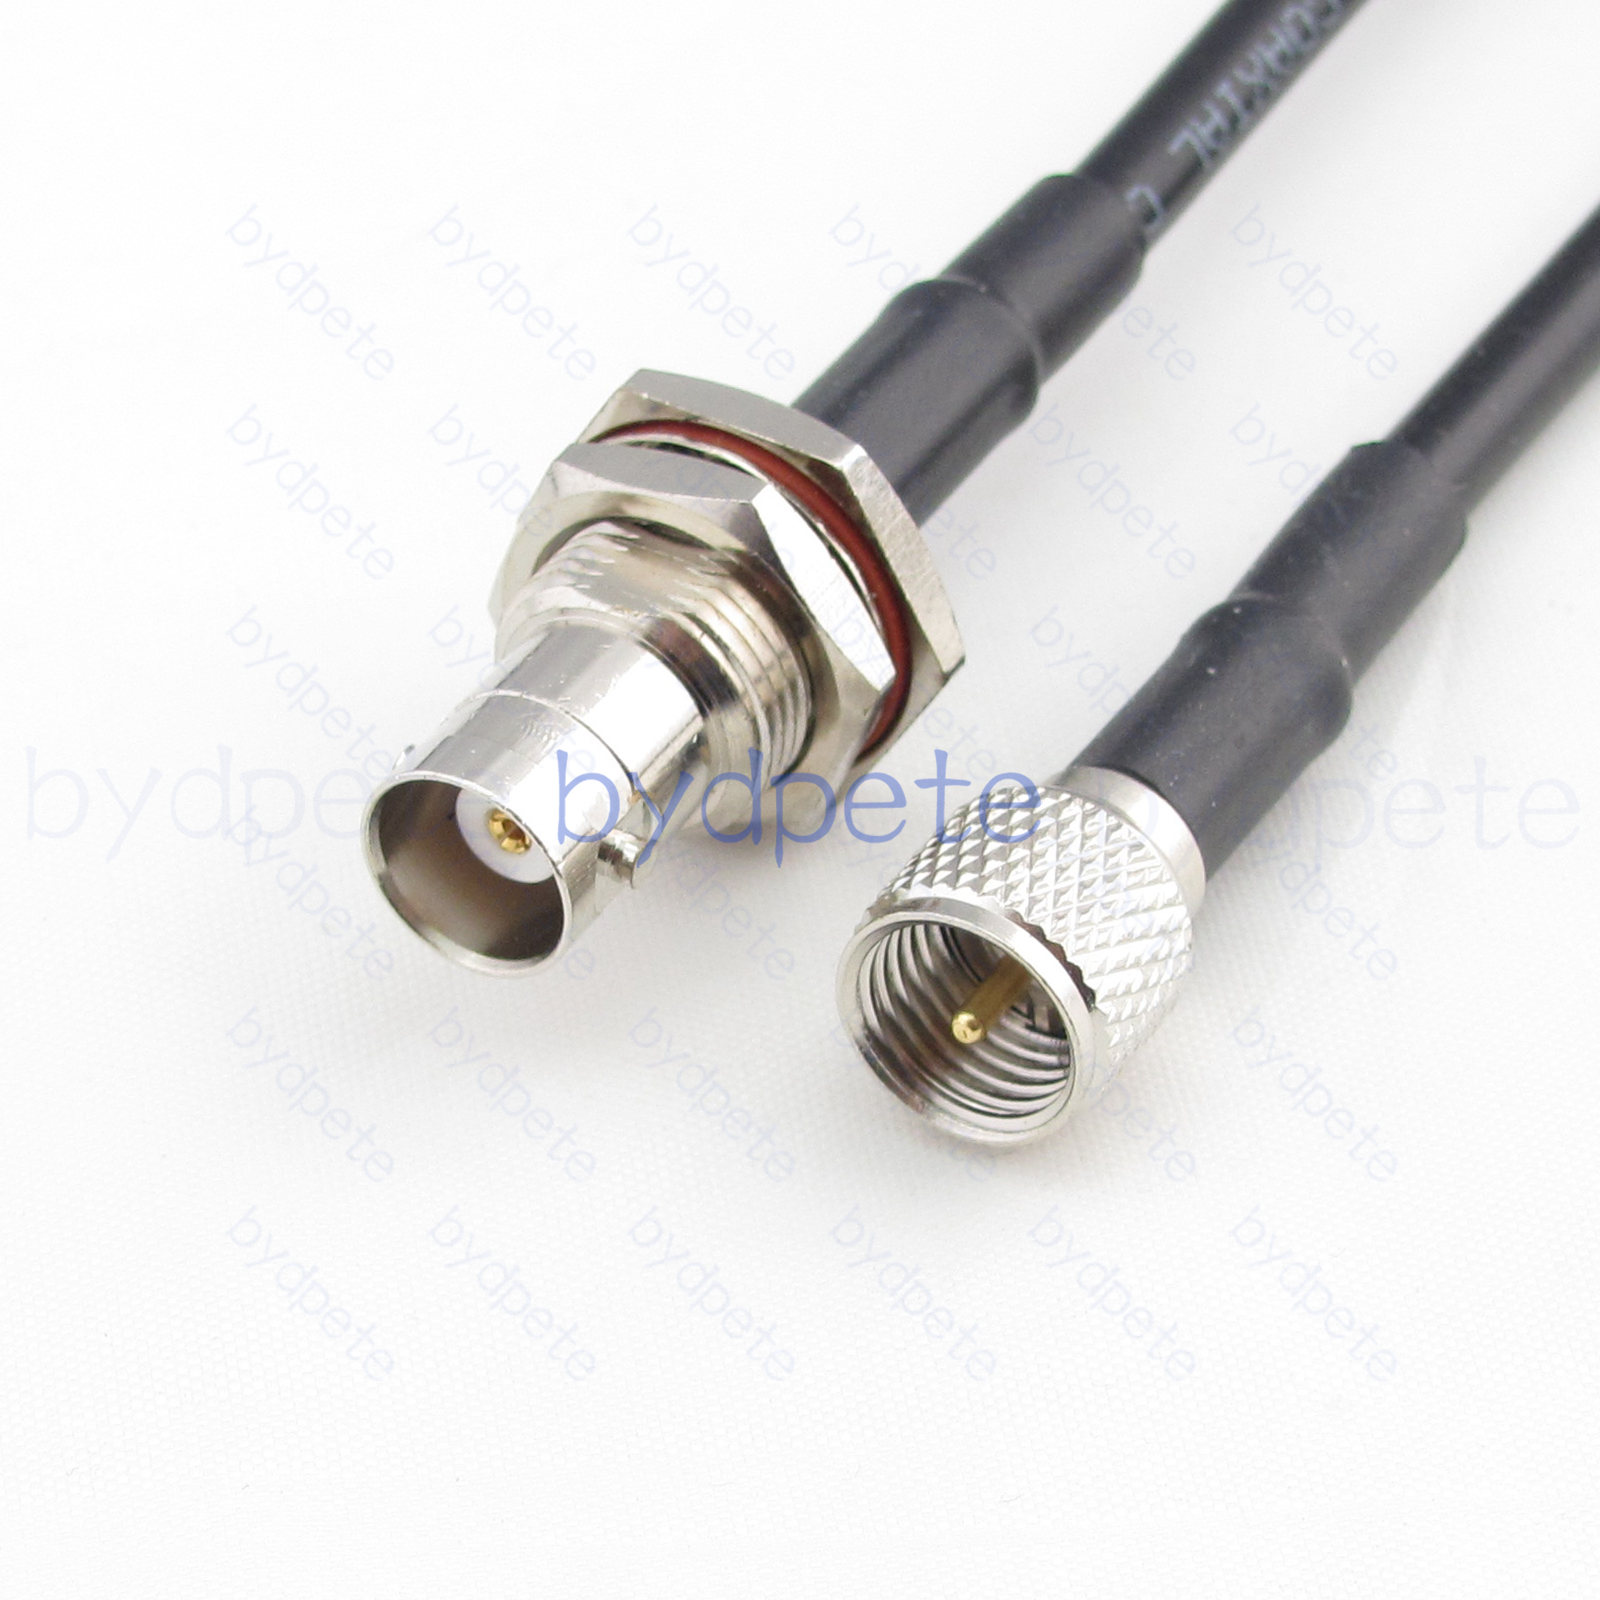 BNC Female Bulkhead Waterproof to Mini UHF Male RG58 Coaxial Cable 50ohms Coax Koaxial Kable bydpete BYDC074BNC58LM